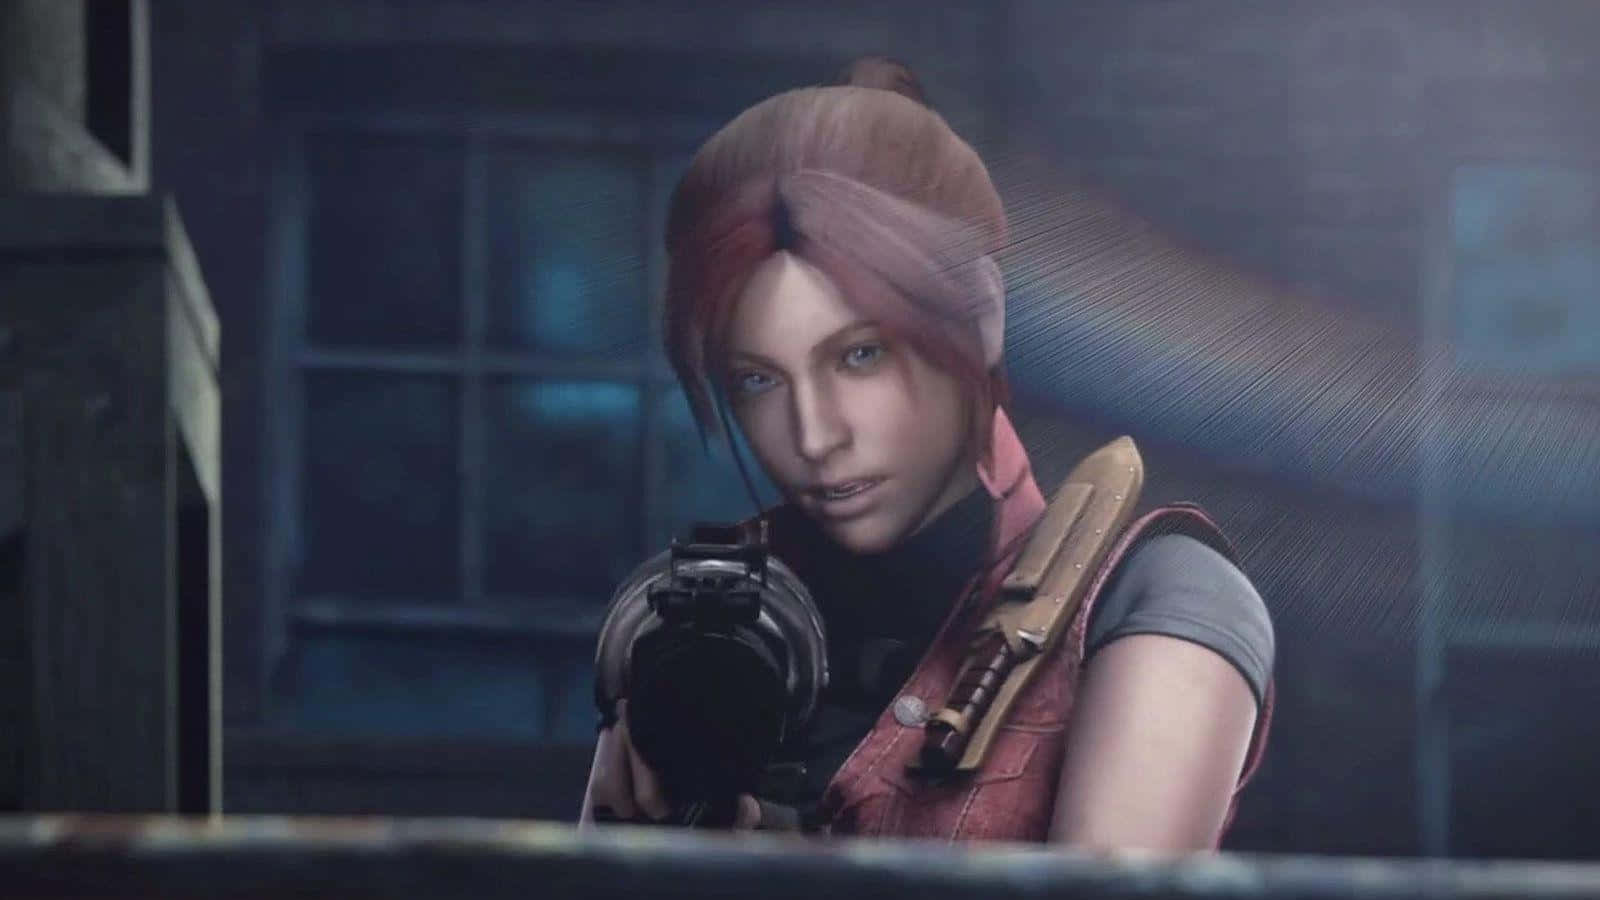 100+] Claire Redfield Wallpapers